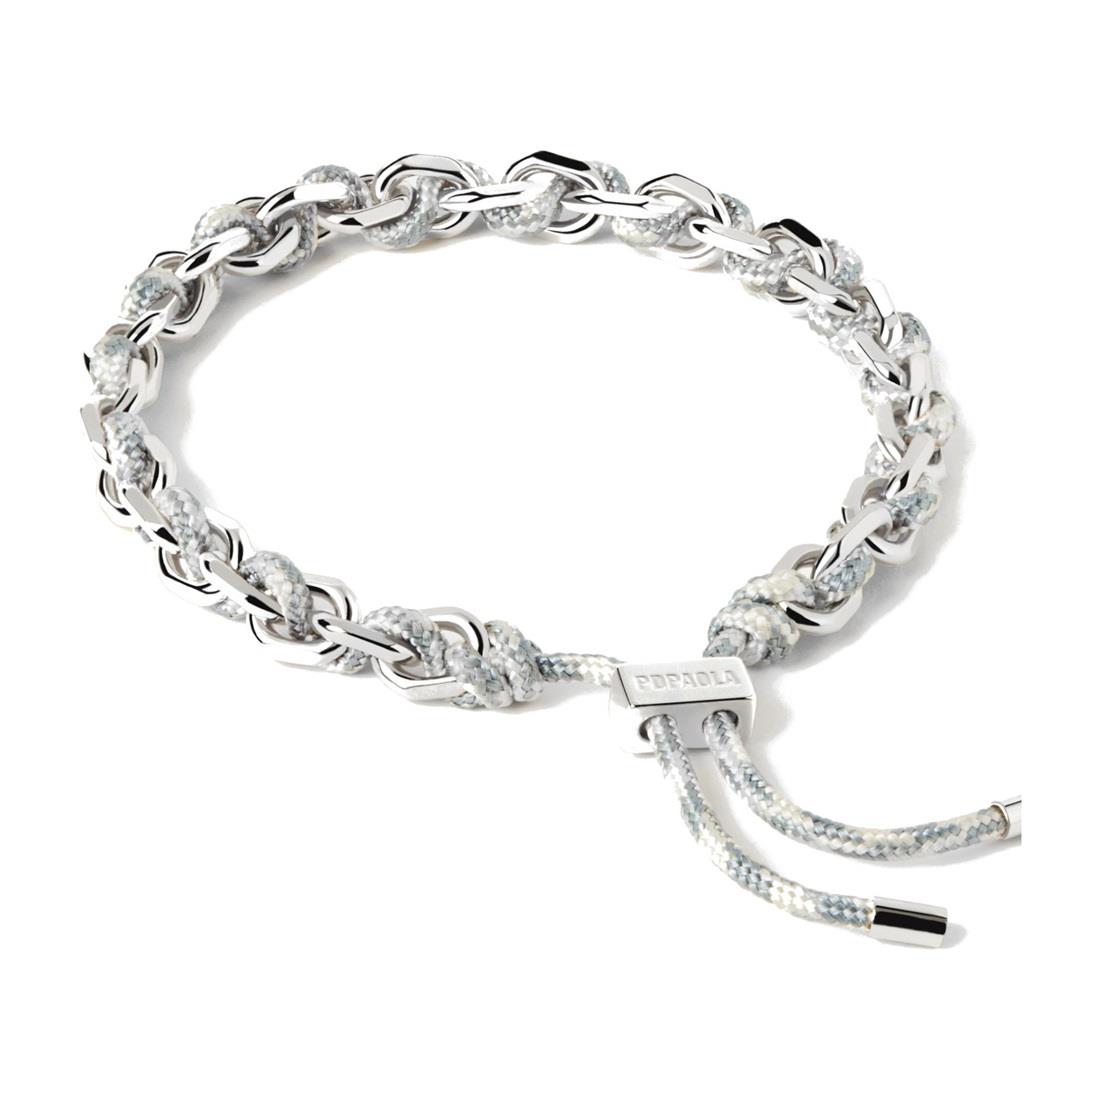 Rope bracelet in silver with gray and white rope - PDPAOLA